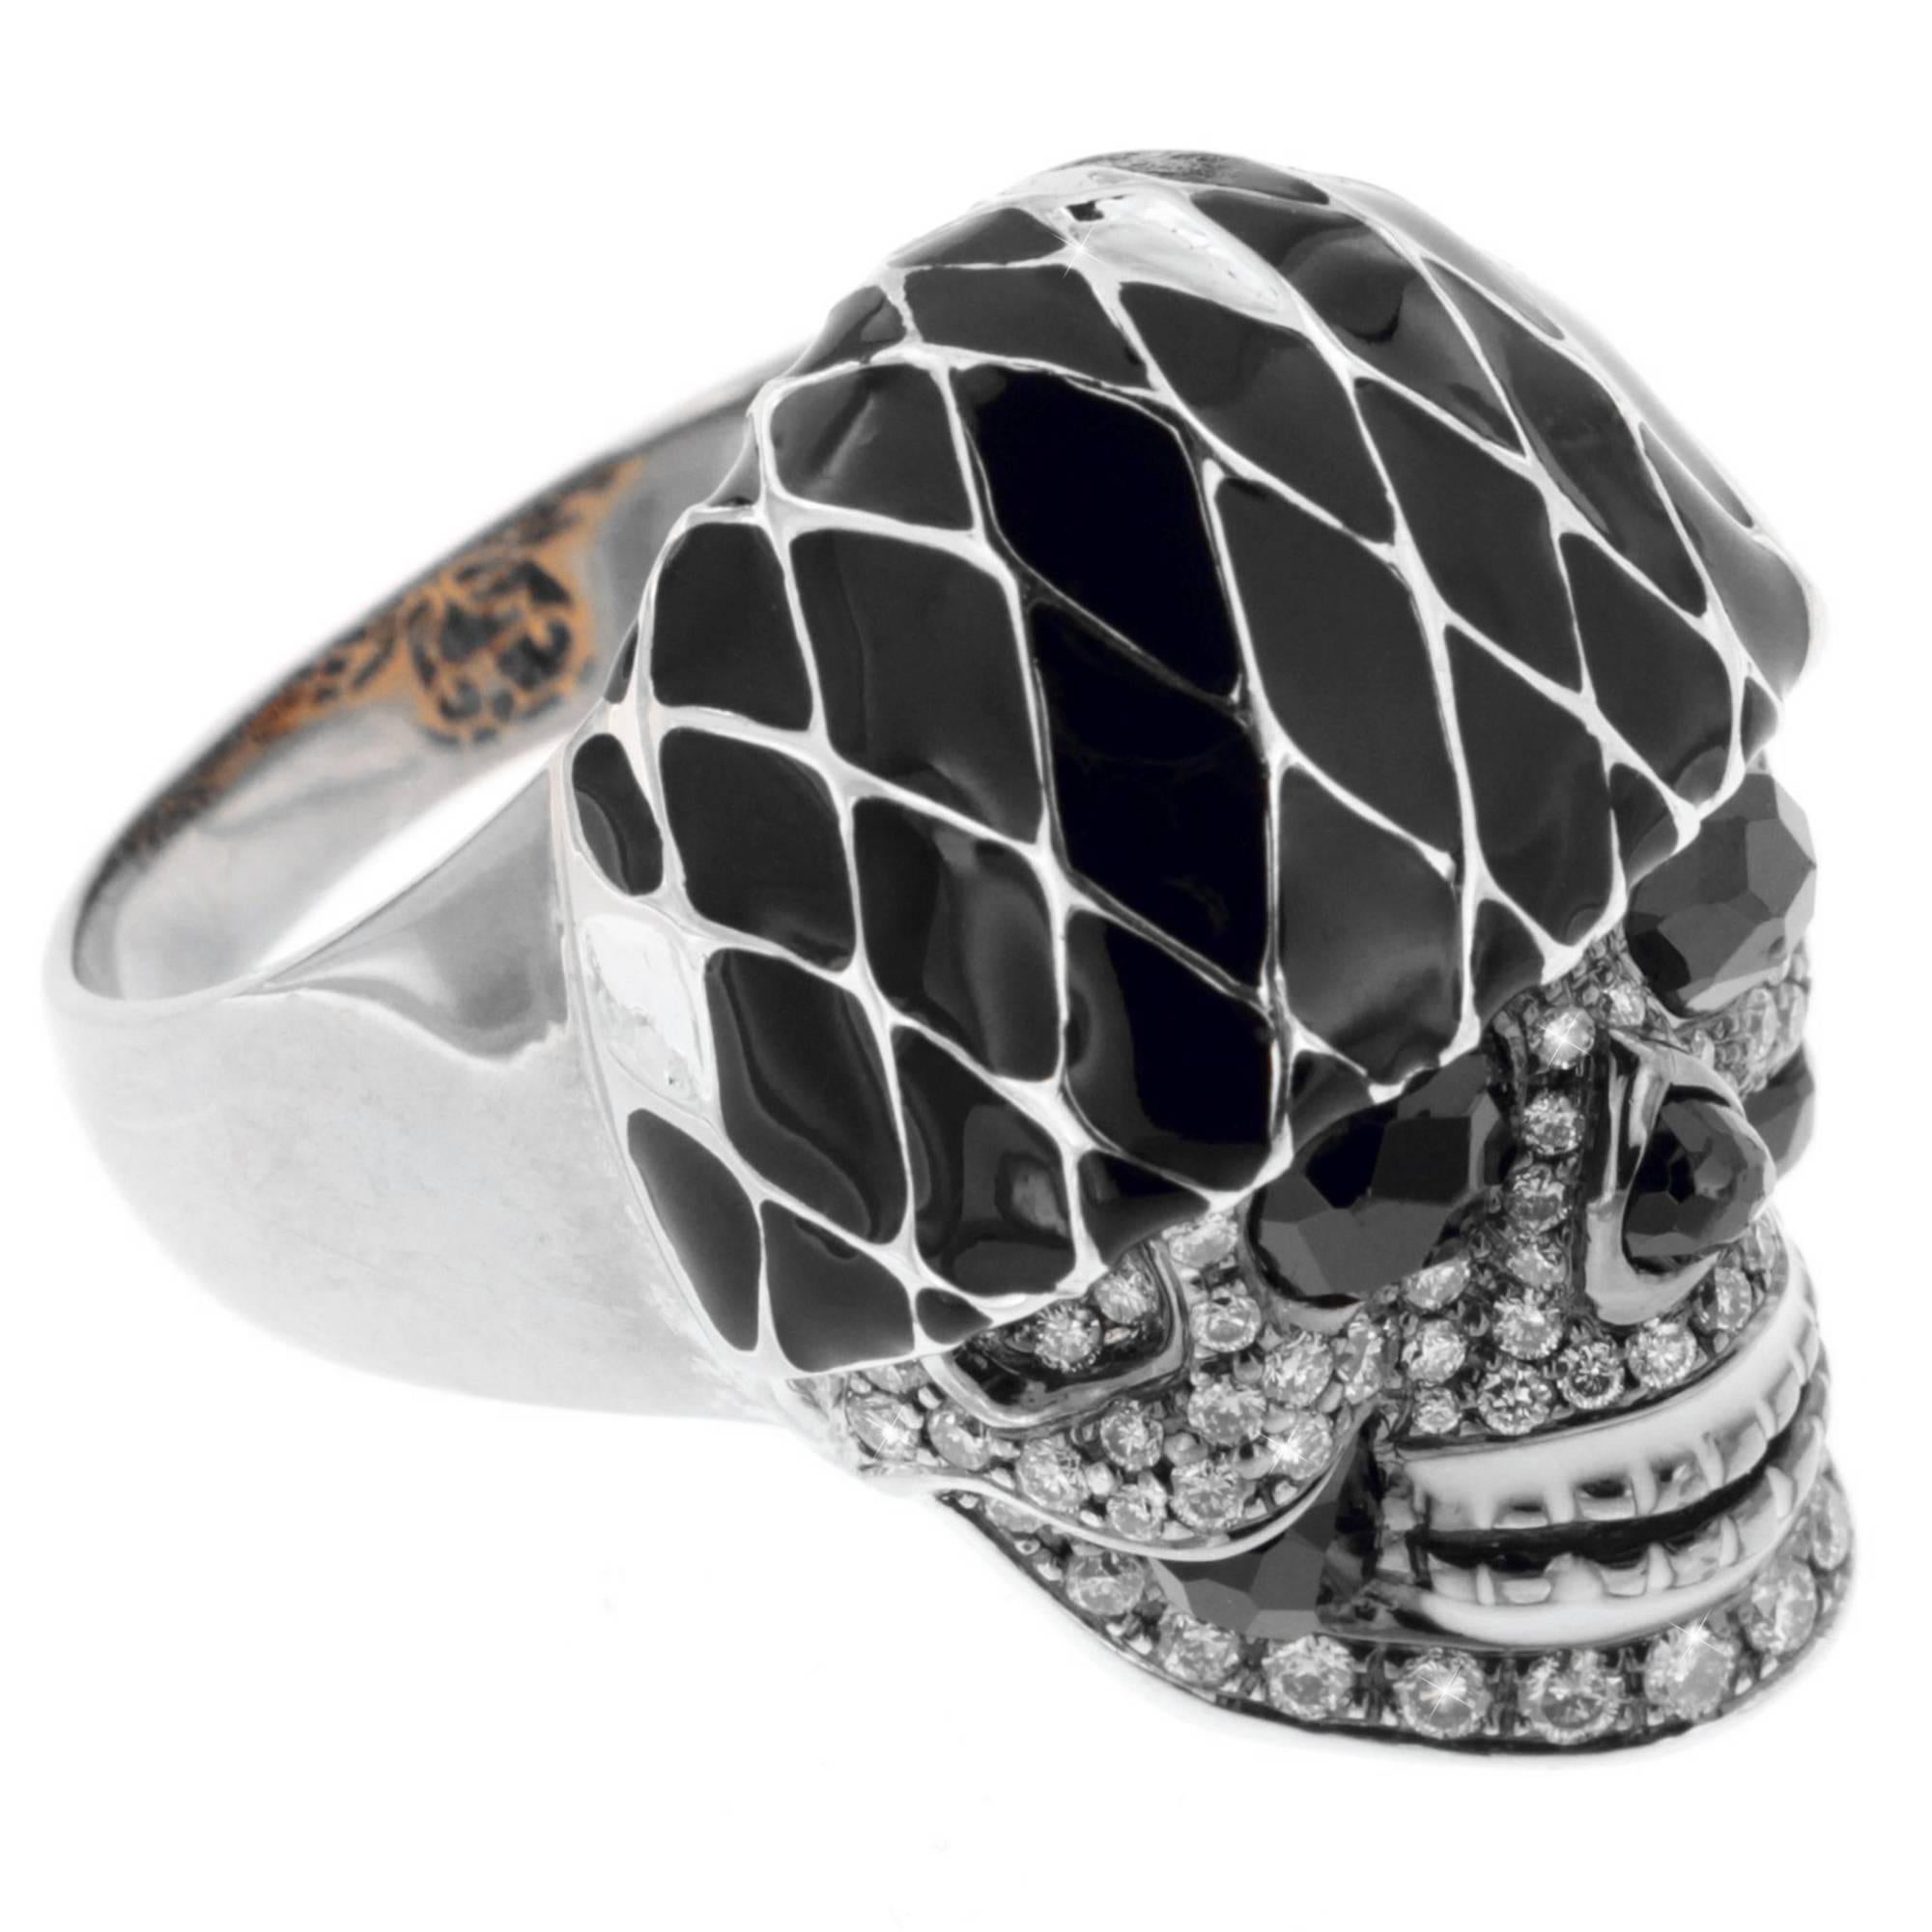 From 2019's Moschino Resort to Gucci, the whimsical black and white Harlequin pattern is becoming all the rage for women and men in ready-to-wear and accessories.

The Harlequin Skull ring, a Zorab Creation is right in step and running off the